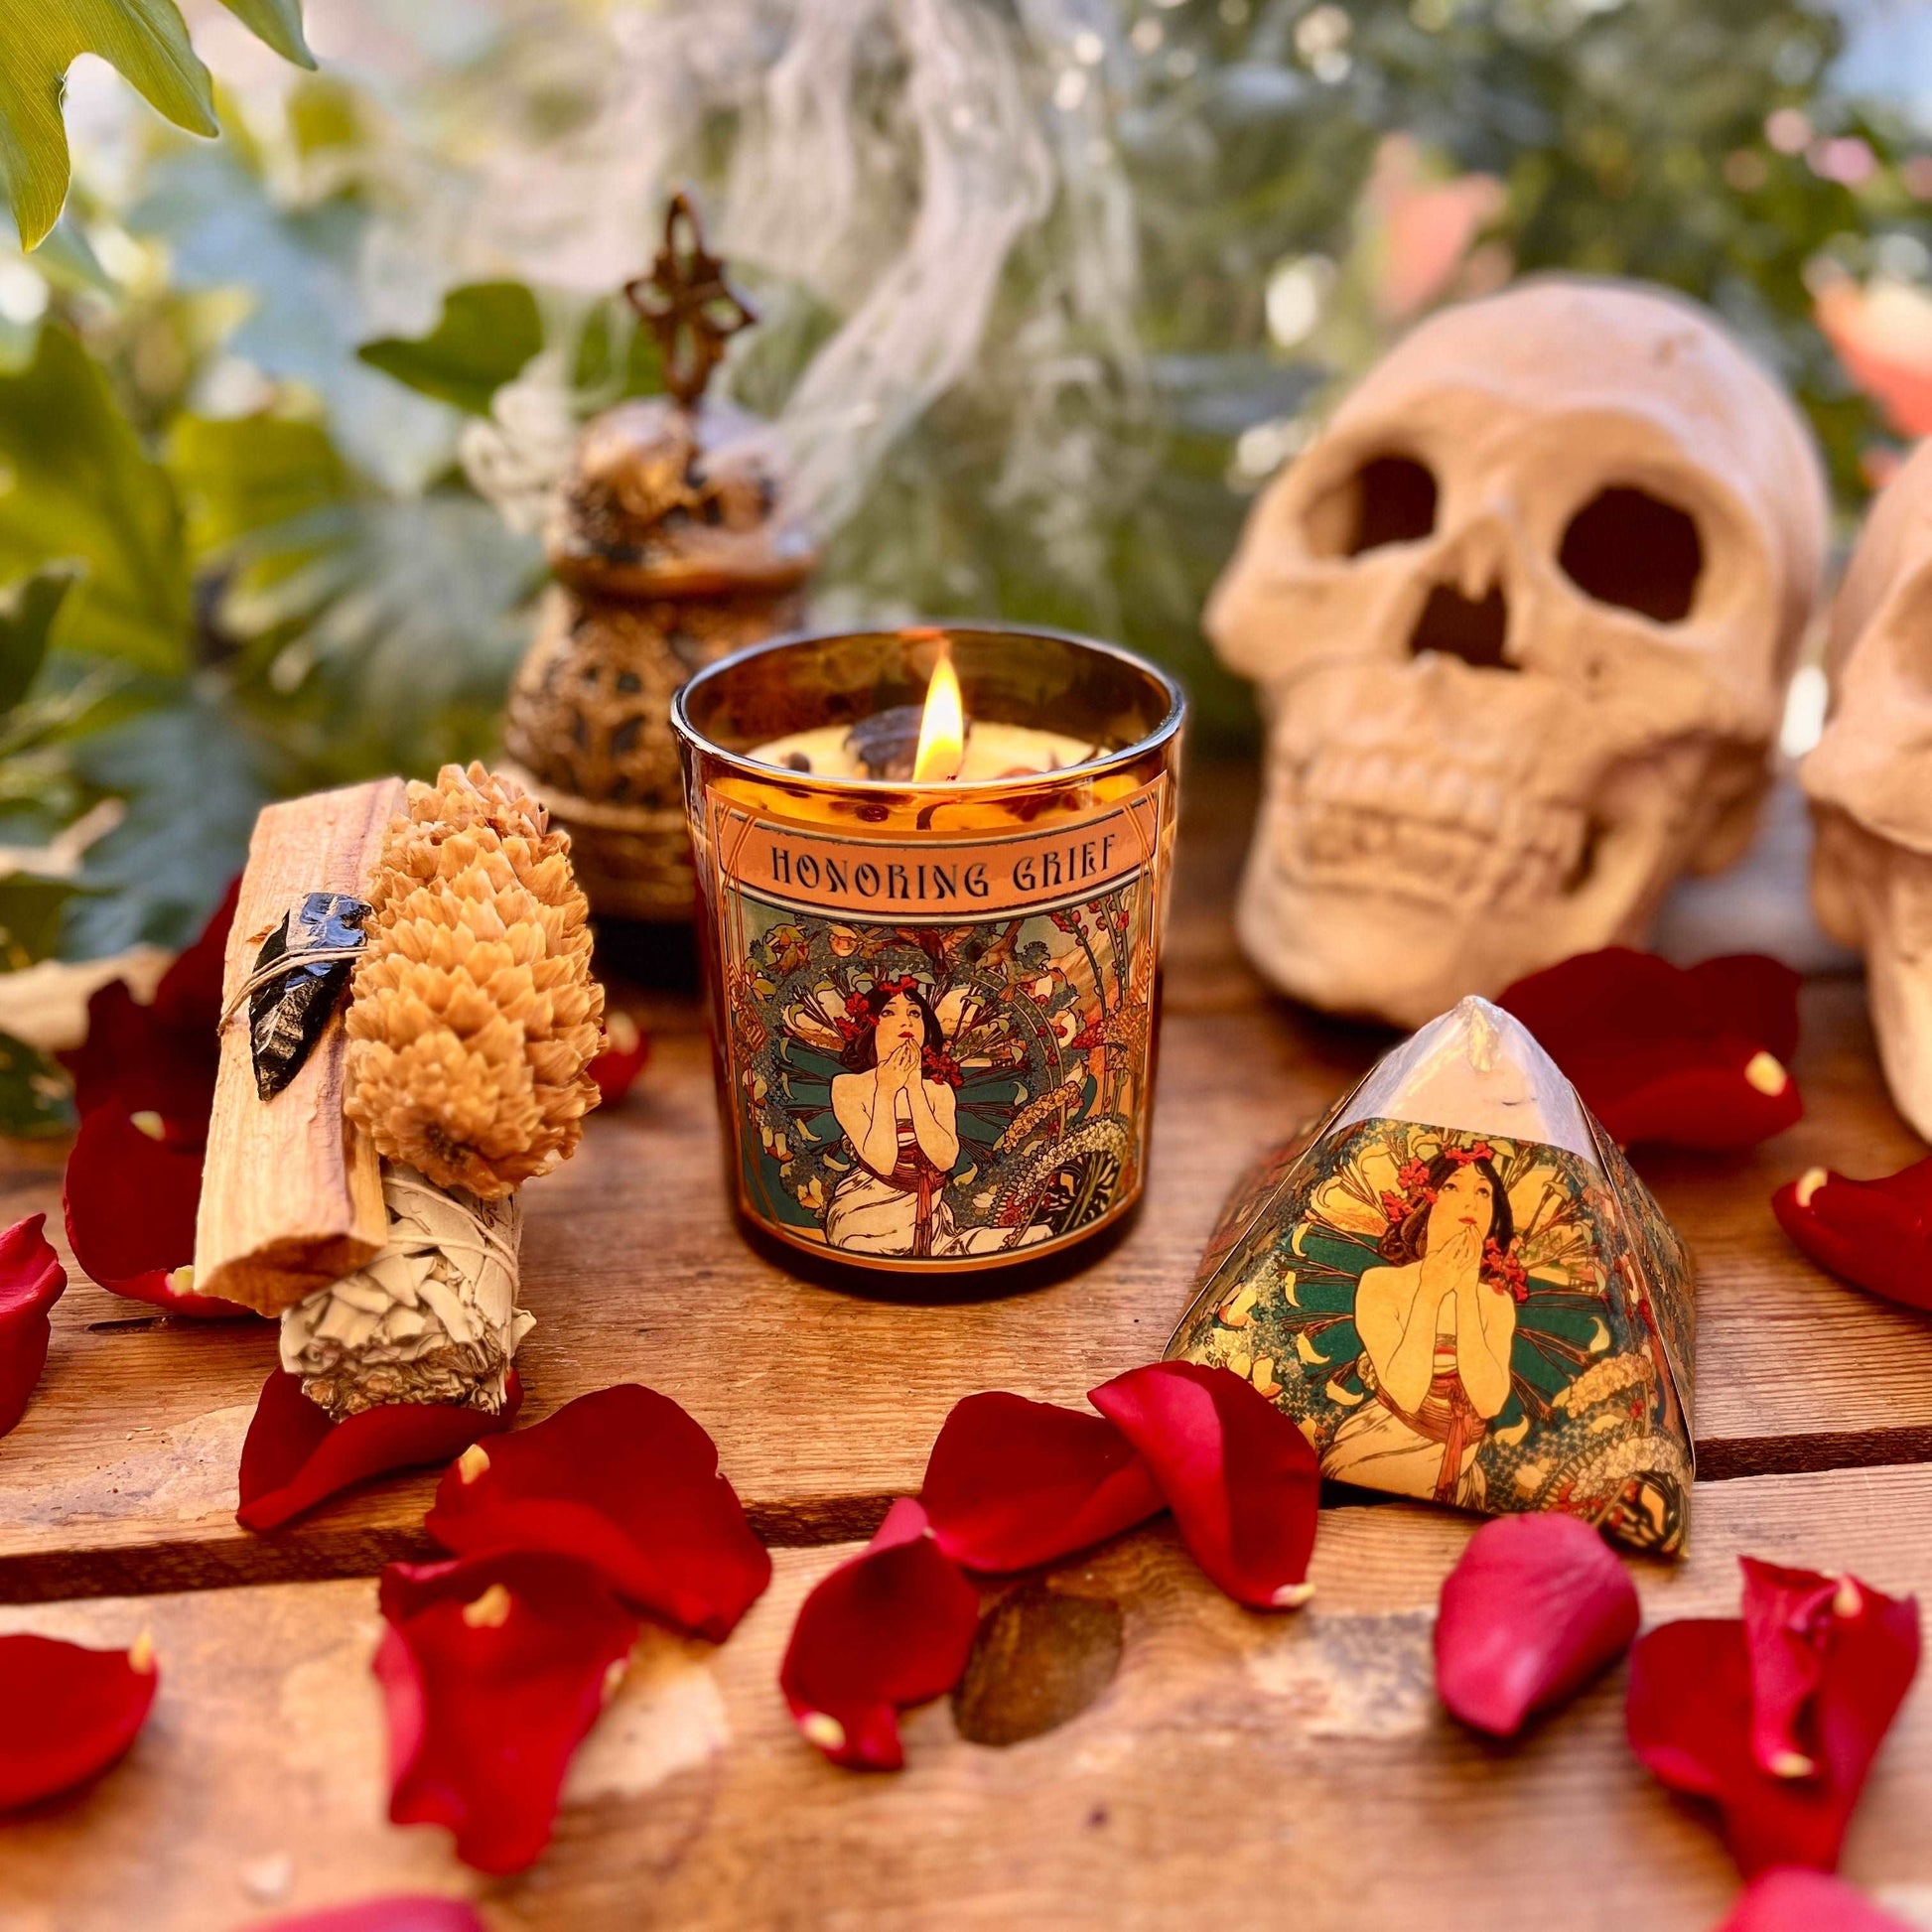 Experience emotional support with our Honoring Grief Bath Bomb, crafted with Orange, Cedar, and Patchouli essential oils. Nourish your senses and find solace as the comforting aroma honors your emotions. Pair with our Honoring Grief candle and bundle for a complete ritual experience.